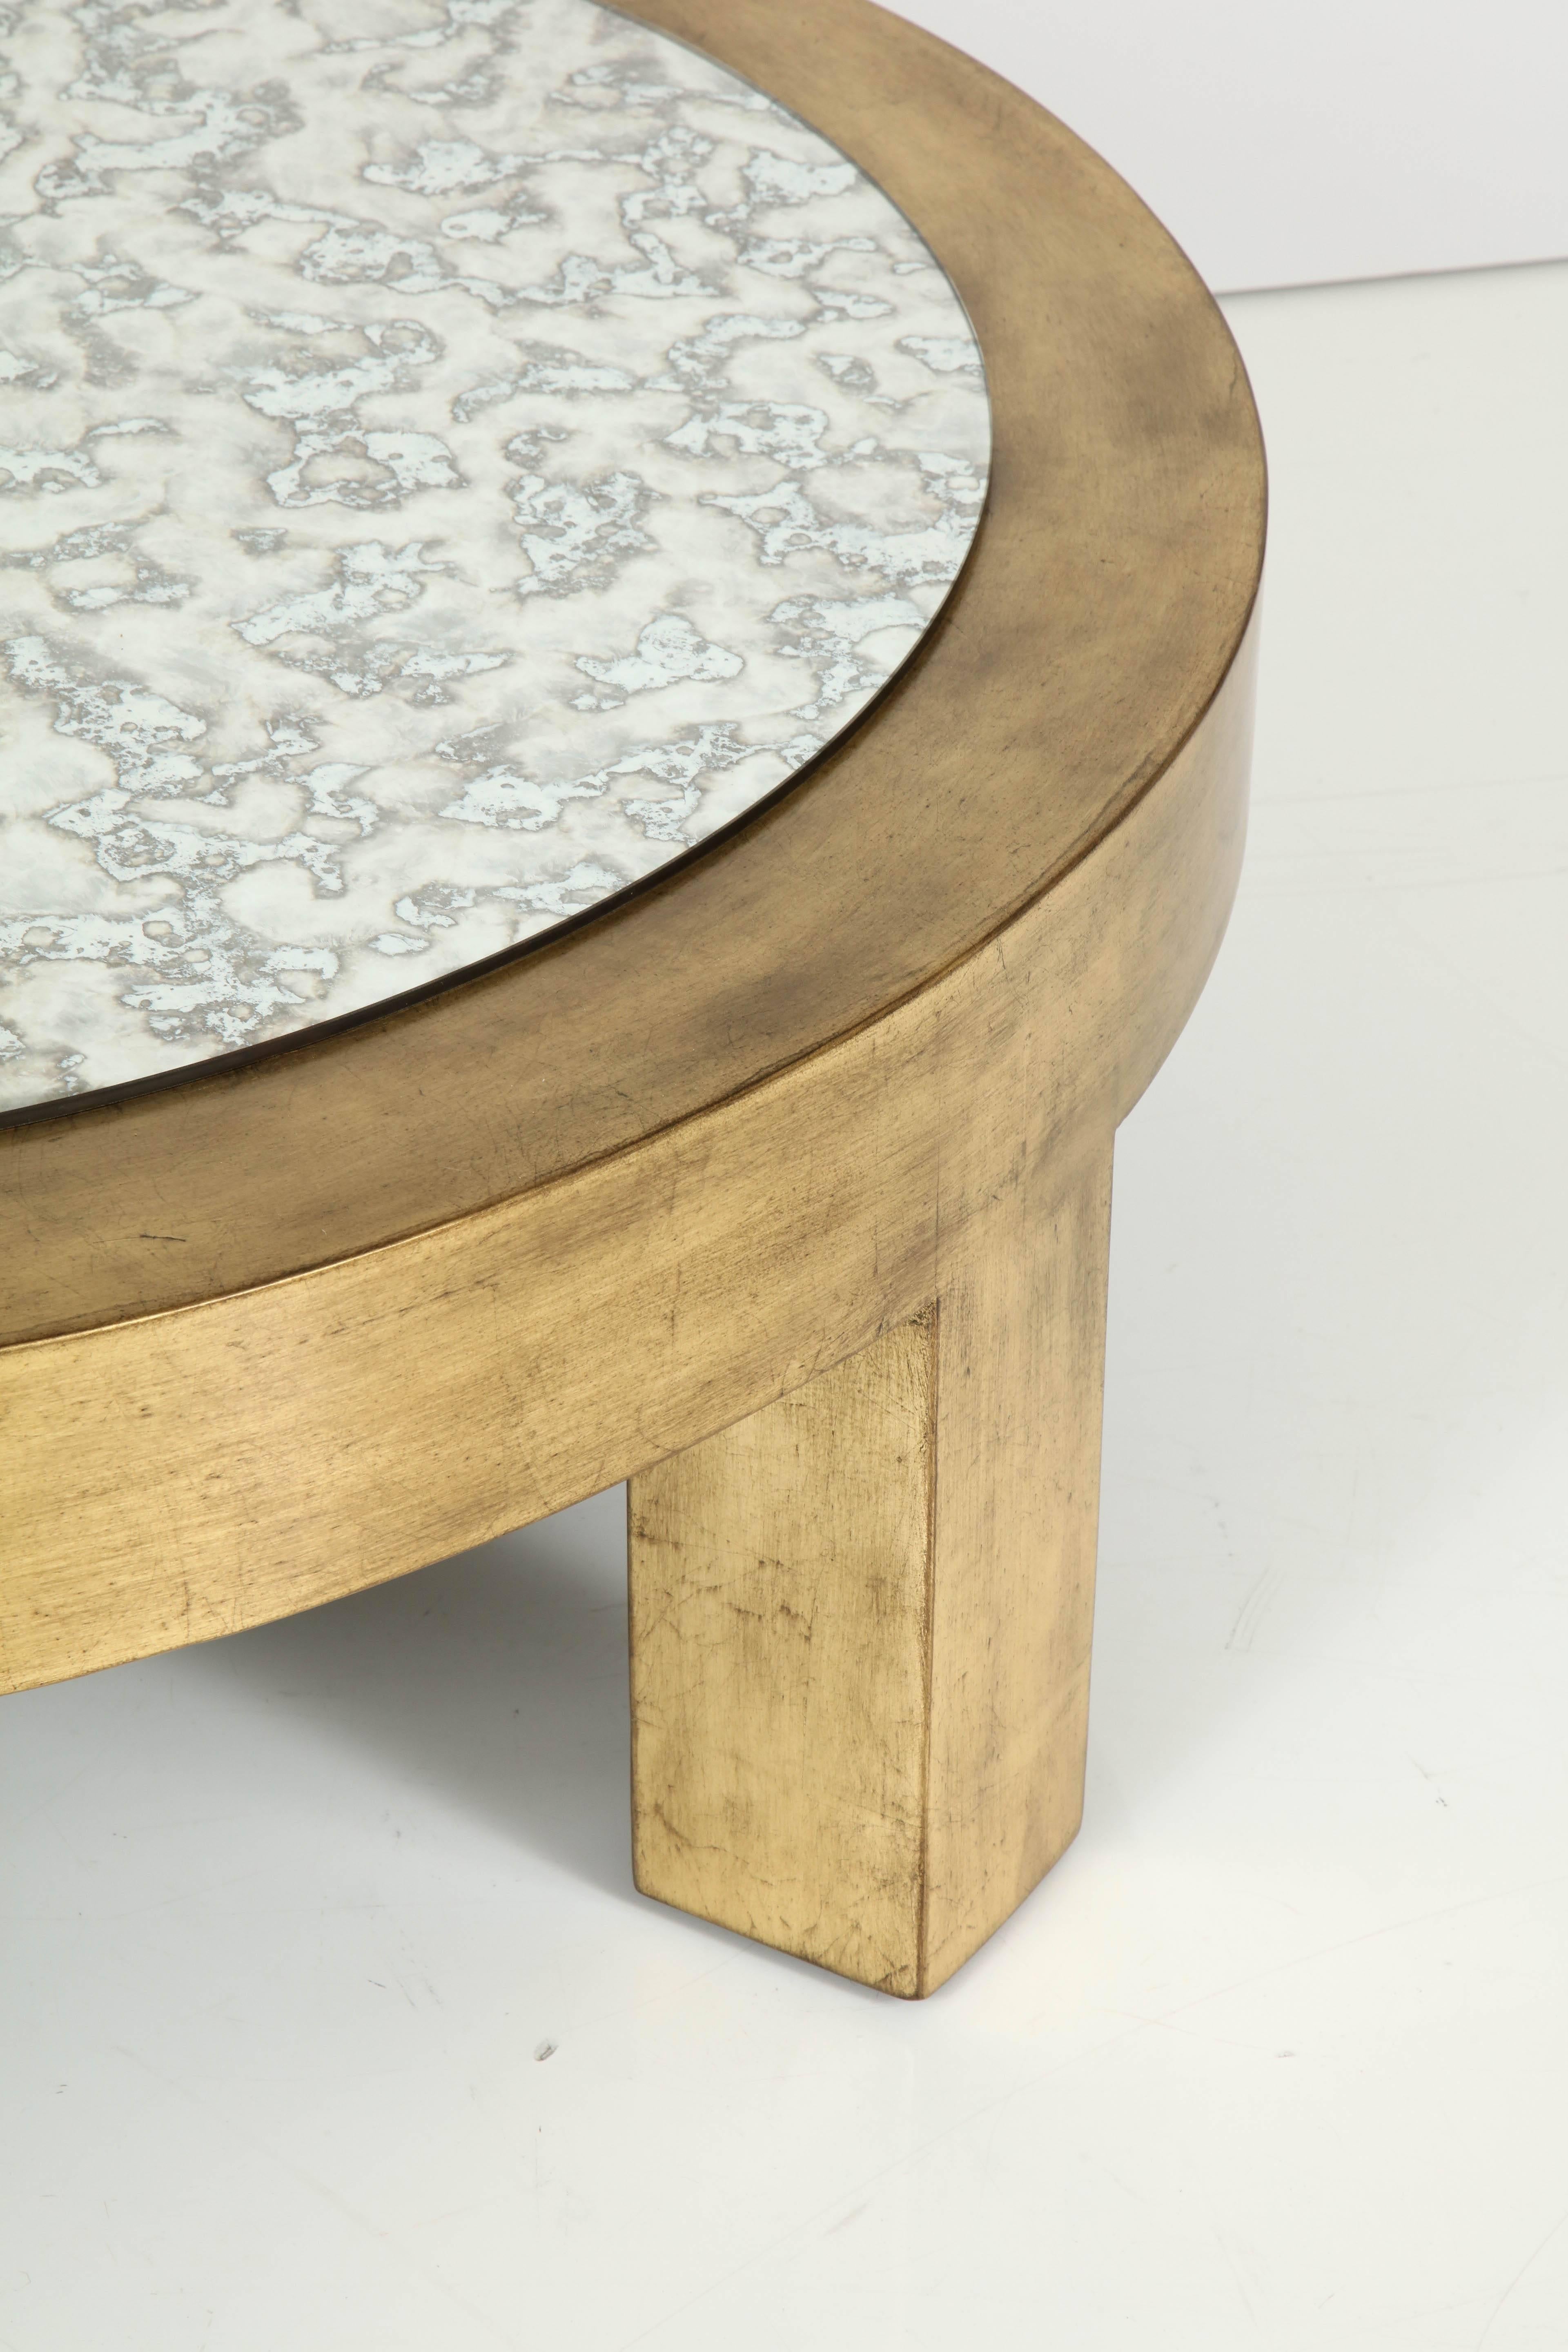 james mont coffee table